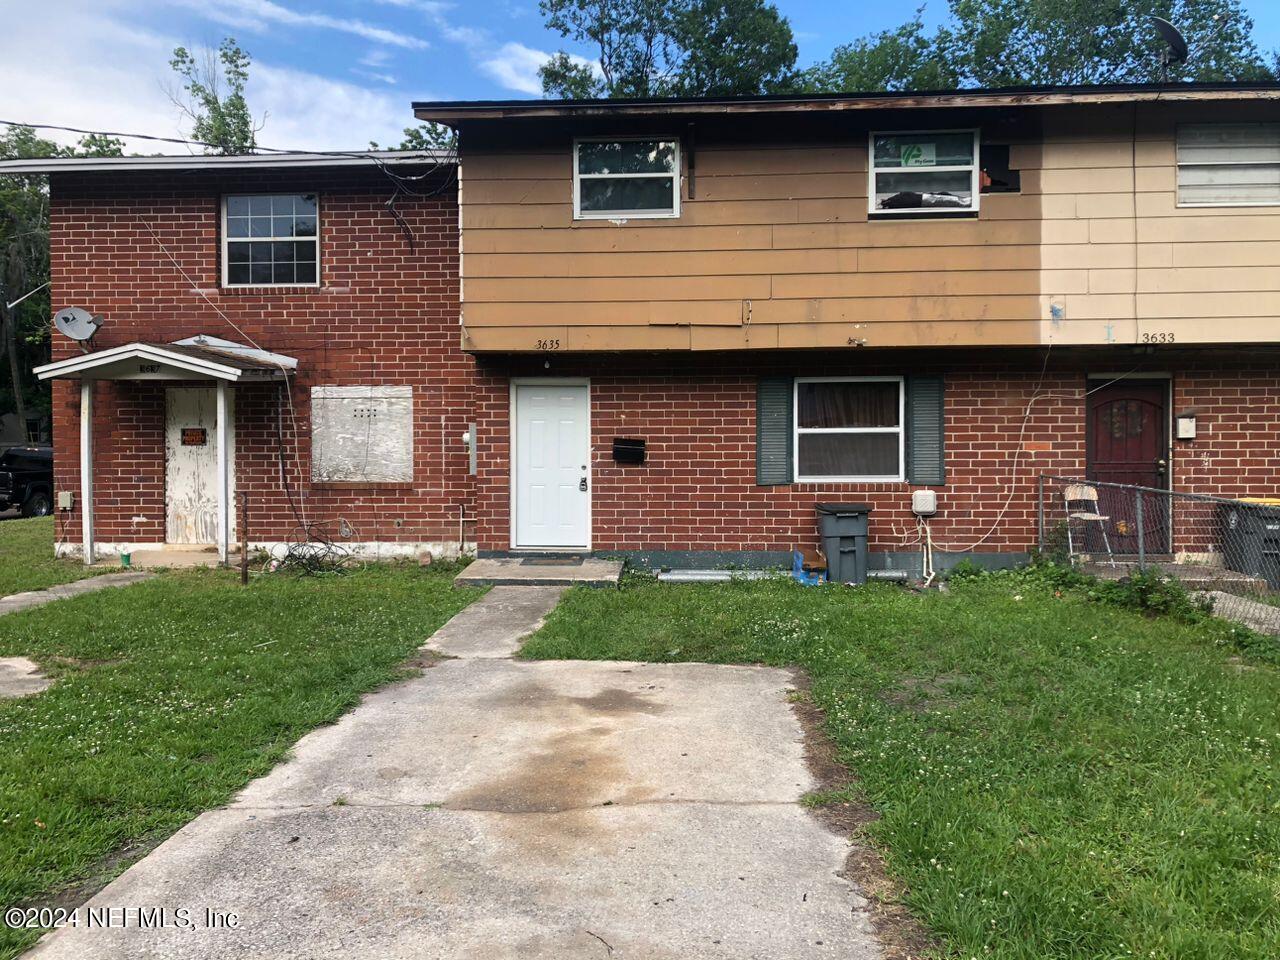 View Jacksonville, FL 32209 townhome